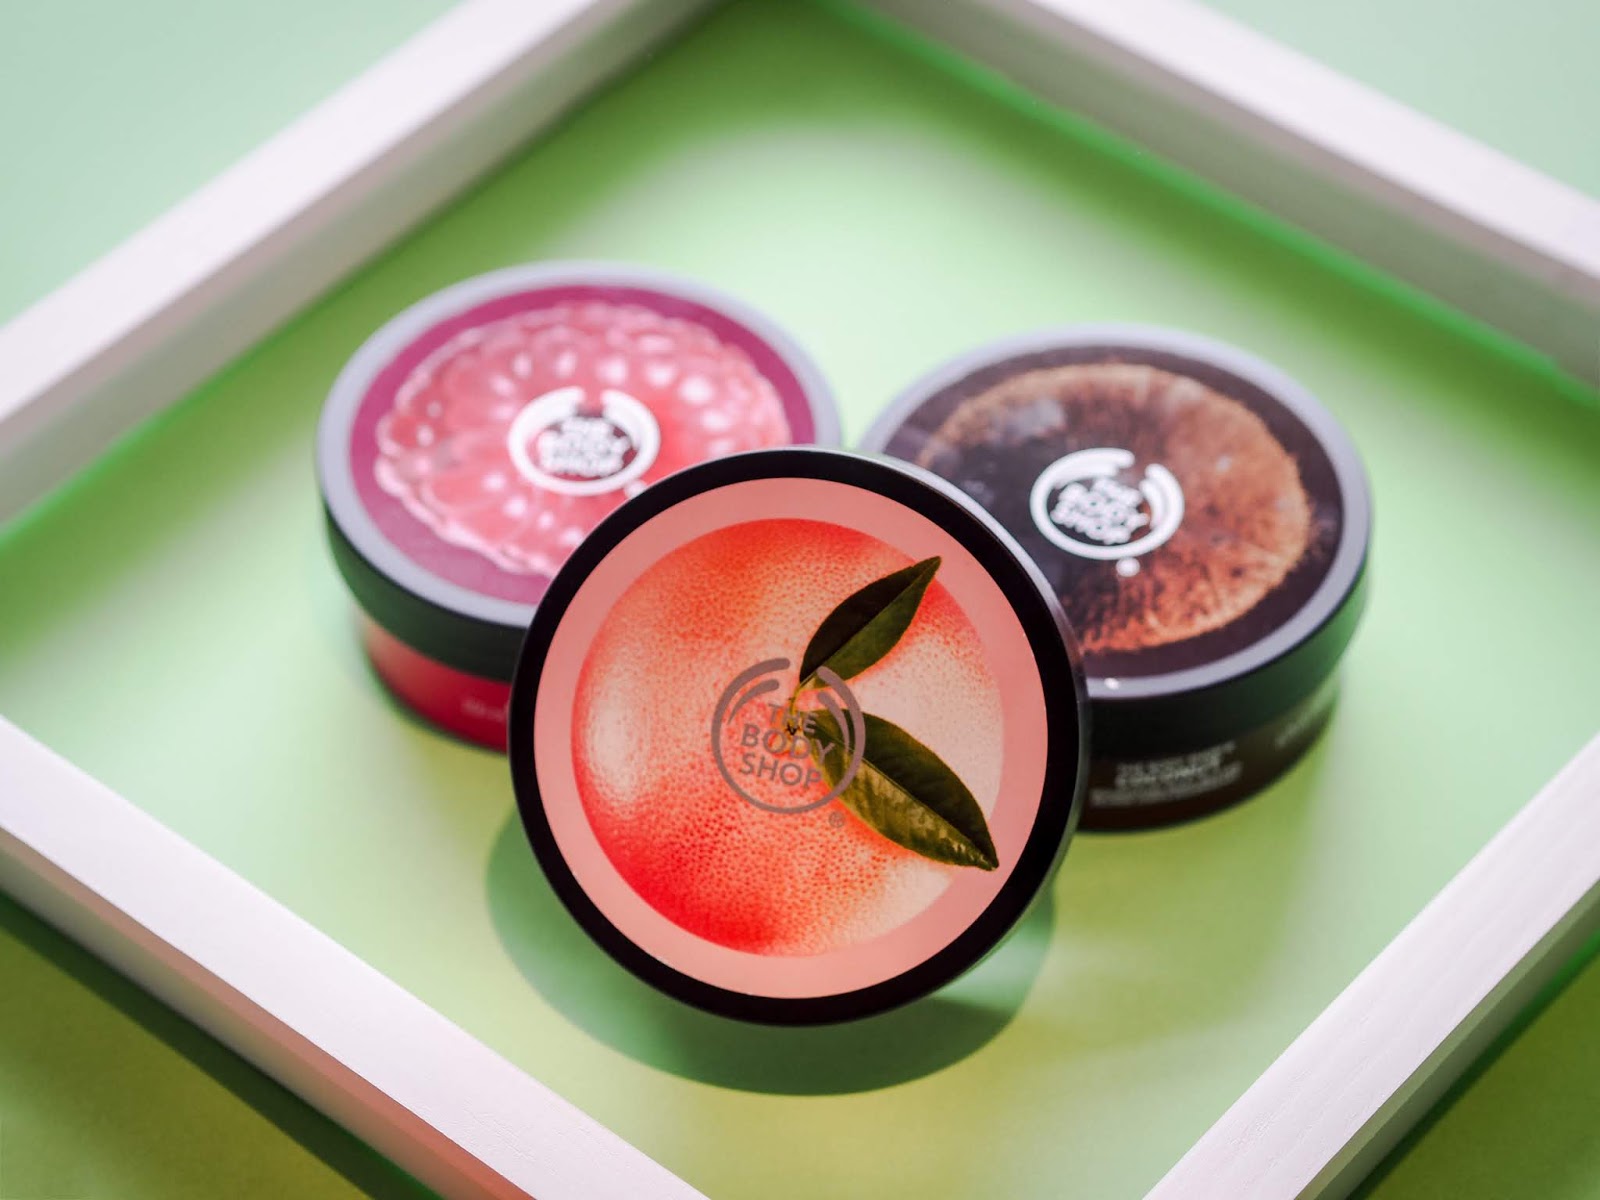 the body shop body butter